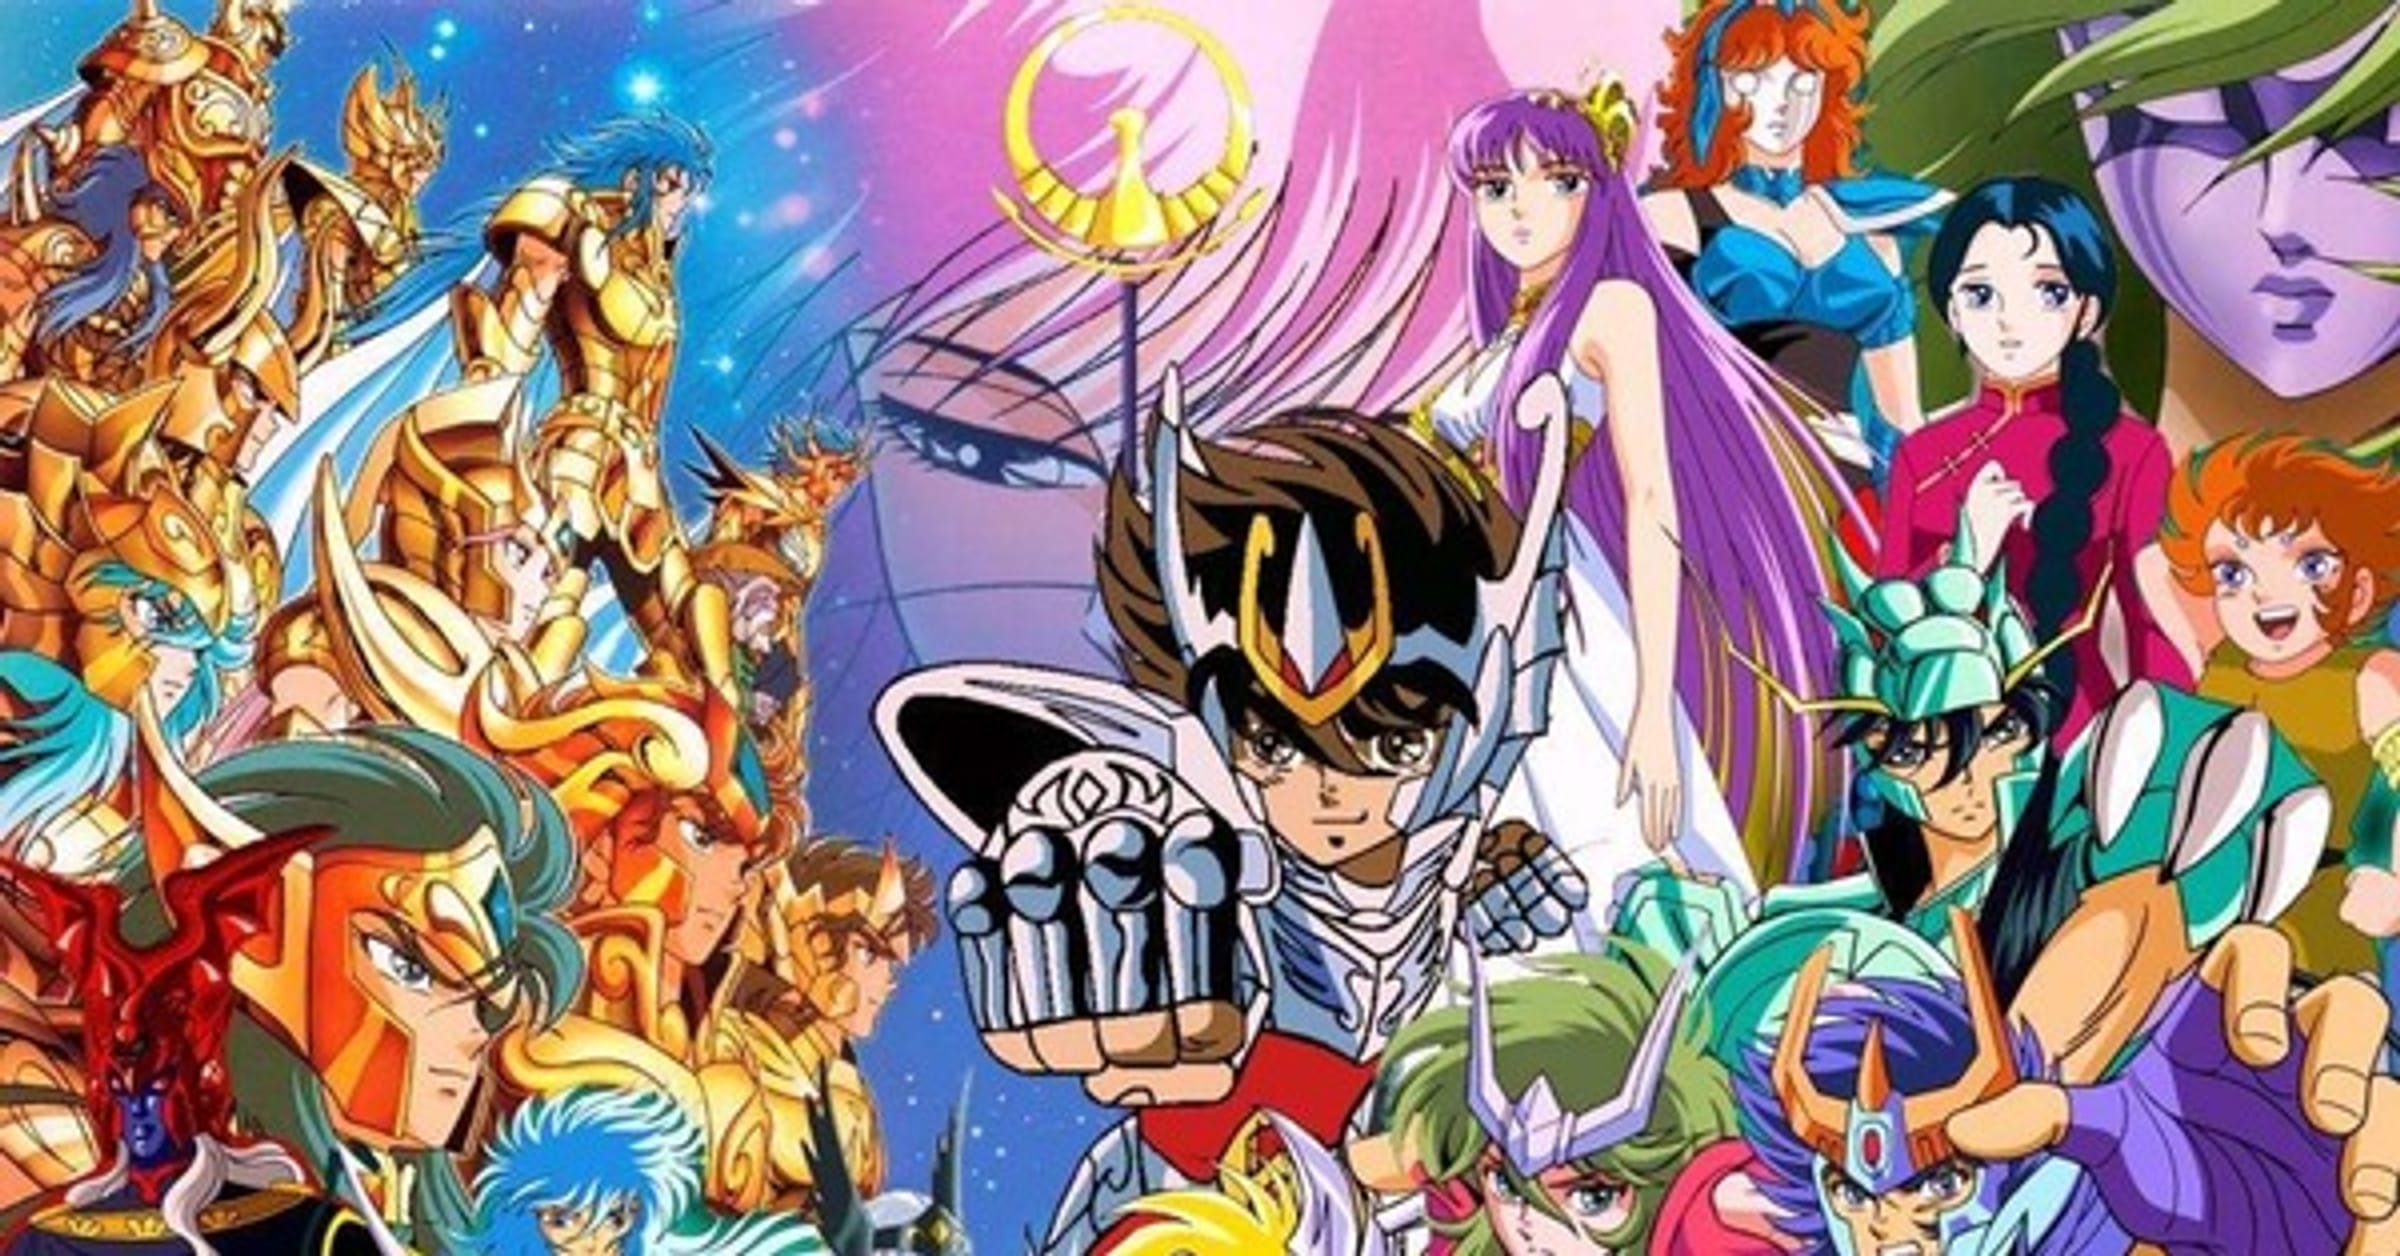 What you think about Omega's ending? : r/SaintSeiya